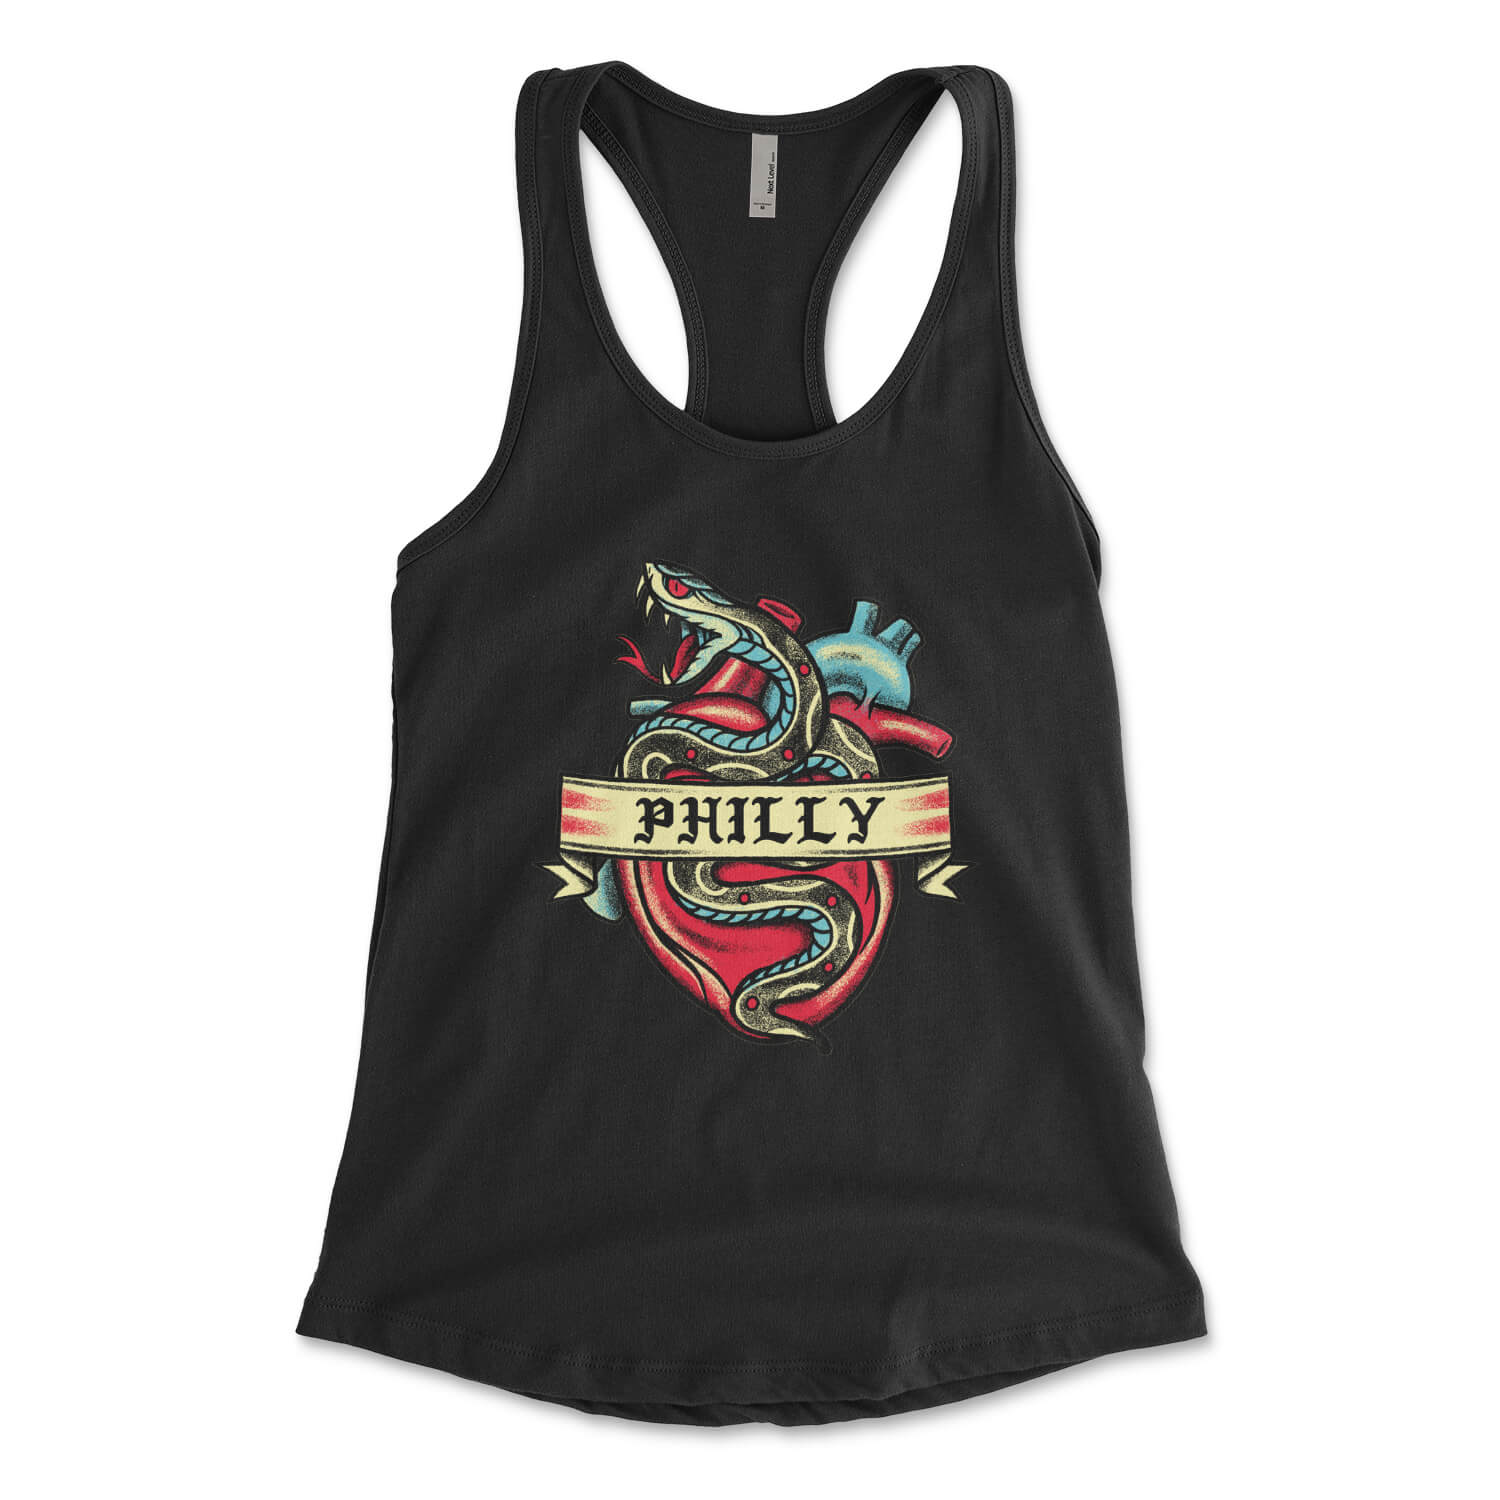 Philadelphia Philly snake tattoo on a black womens racerback tank top from Phillygoat